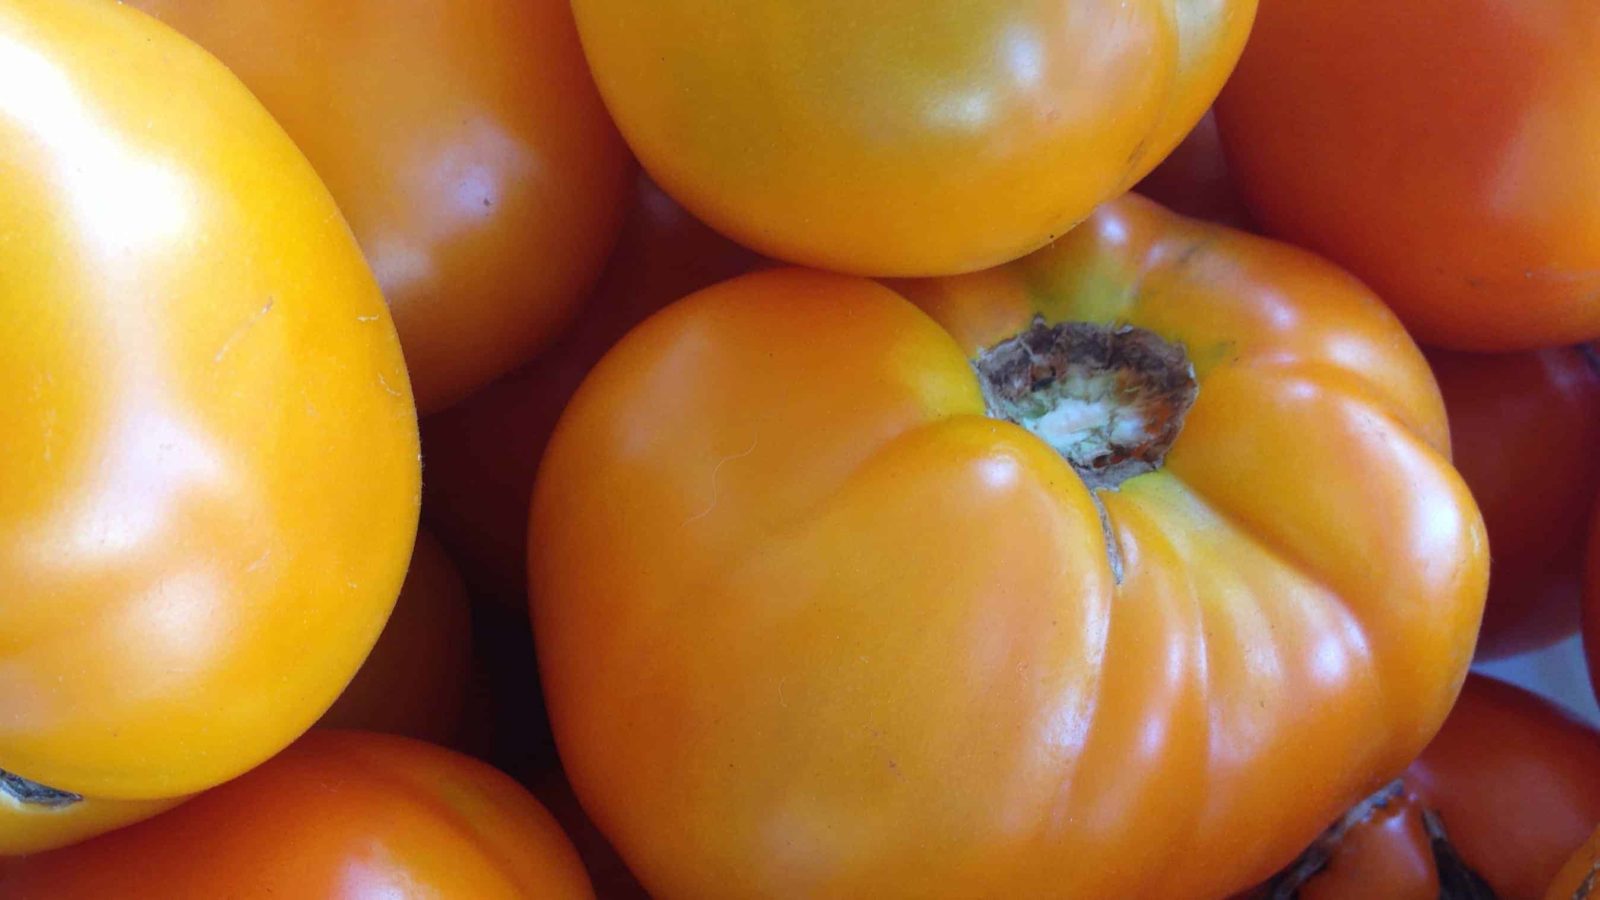 Heirloom tomatoes range in shades of fall gold at Bartlett's Orchards n Richmond.